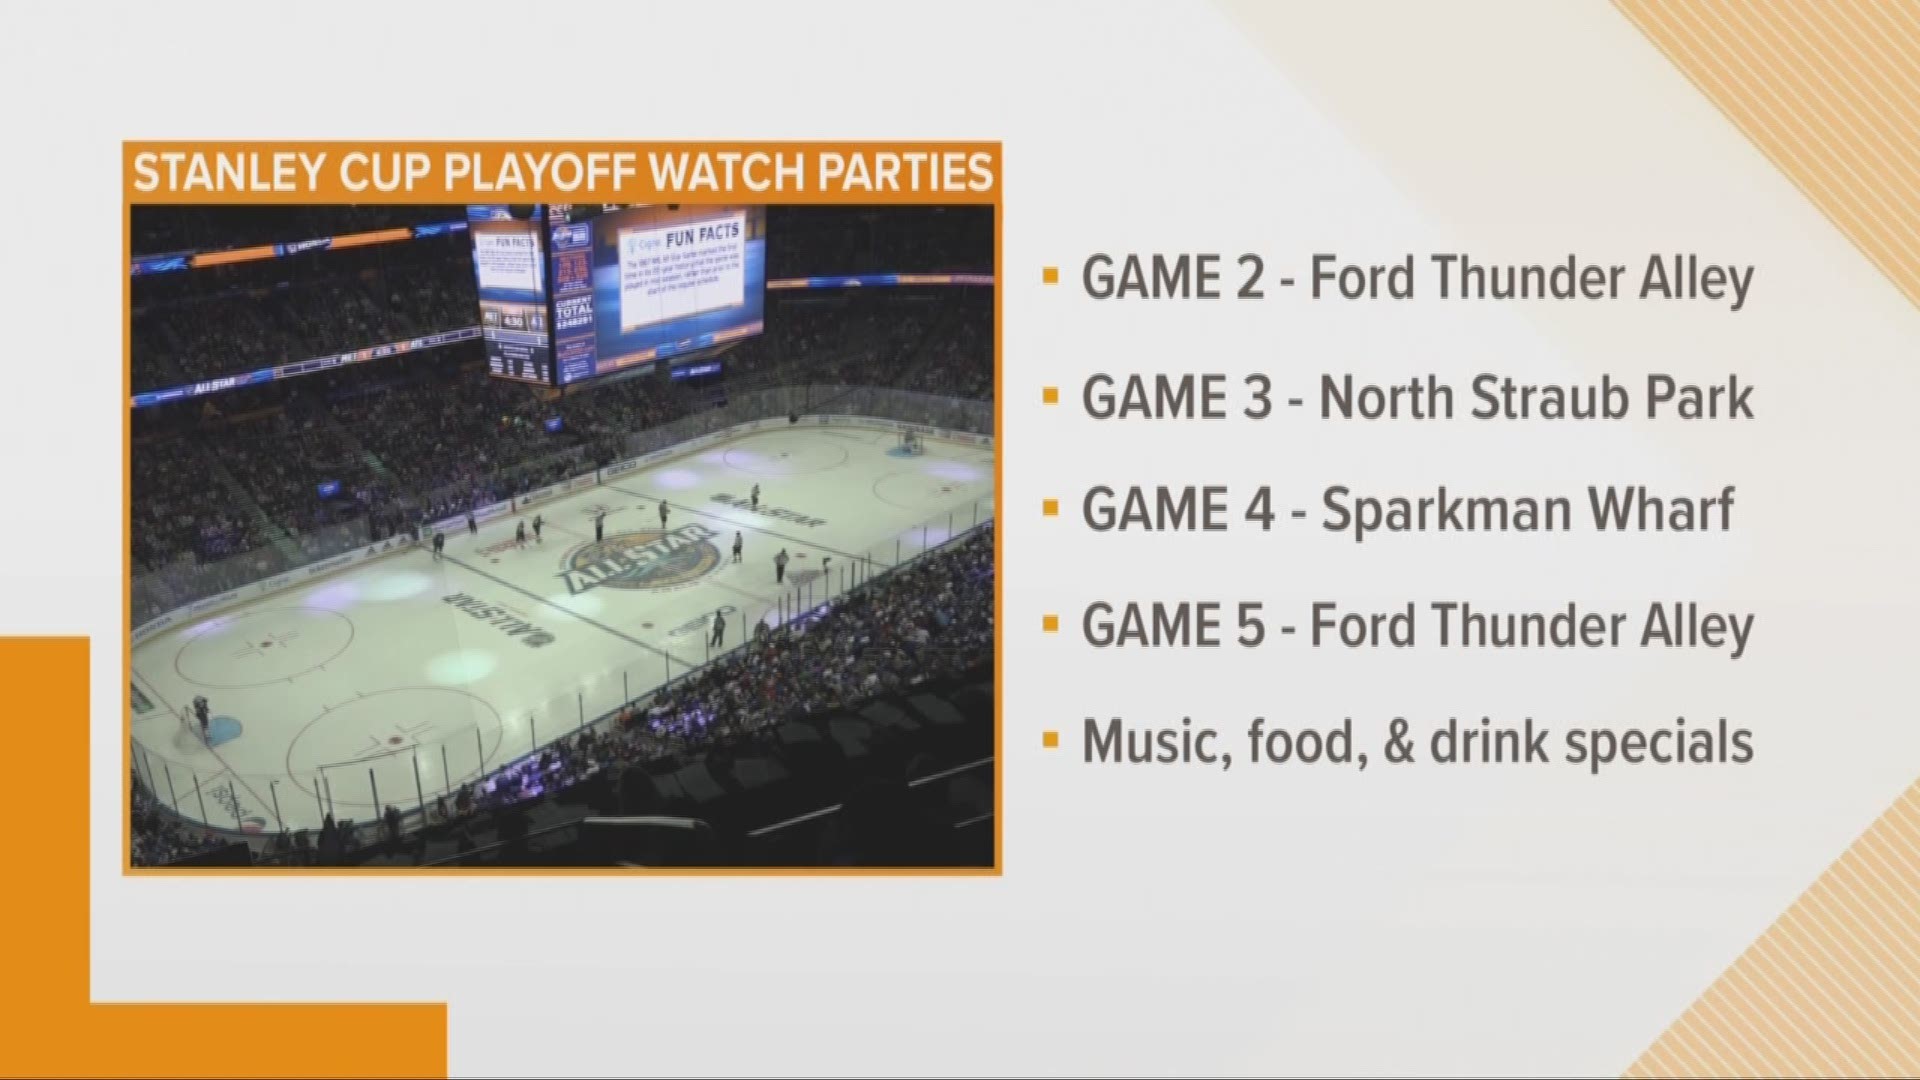 The Tampa Bay Lightning will have official watch parties throughout the Bay area.